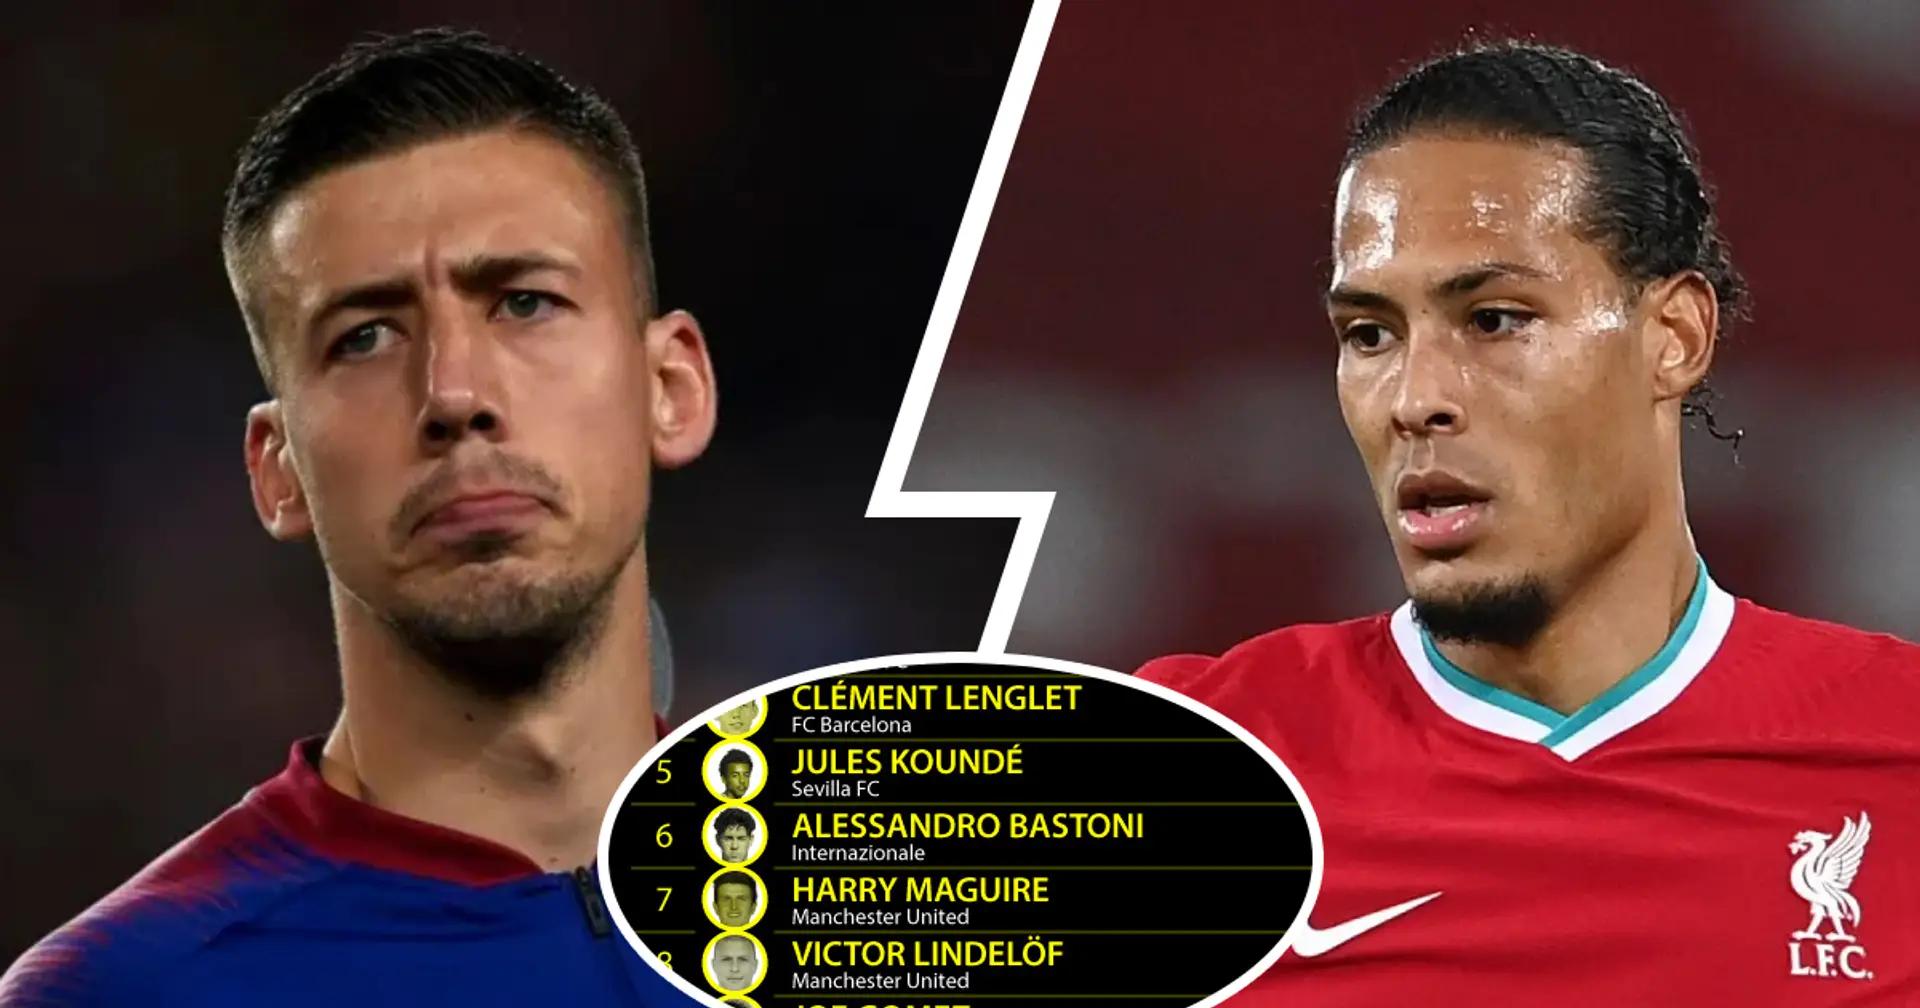 Clement Lenglet named among most expensive centre-backs